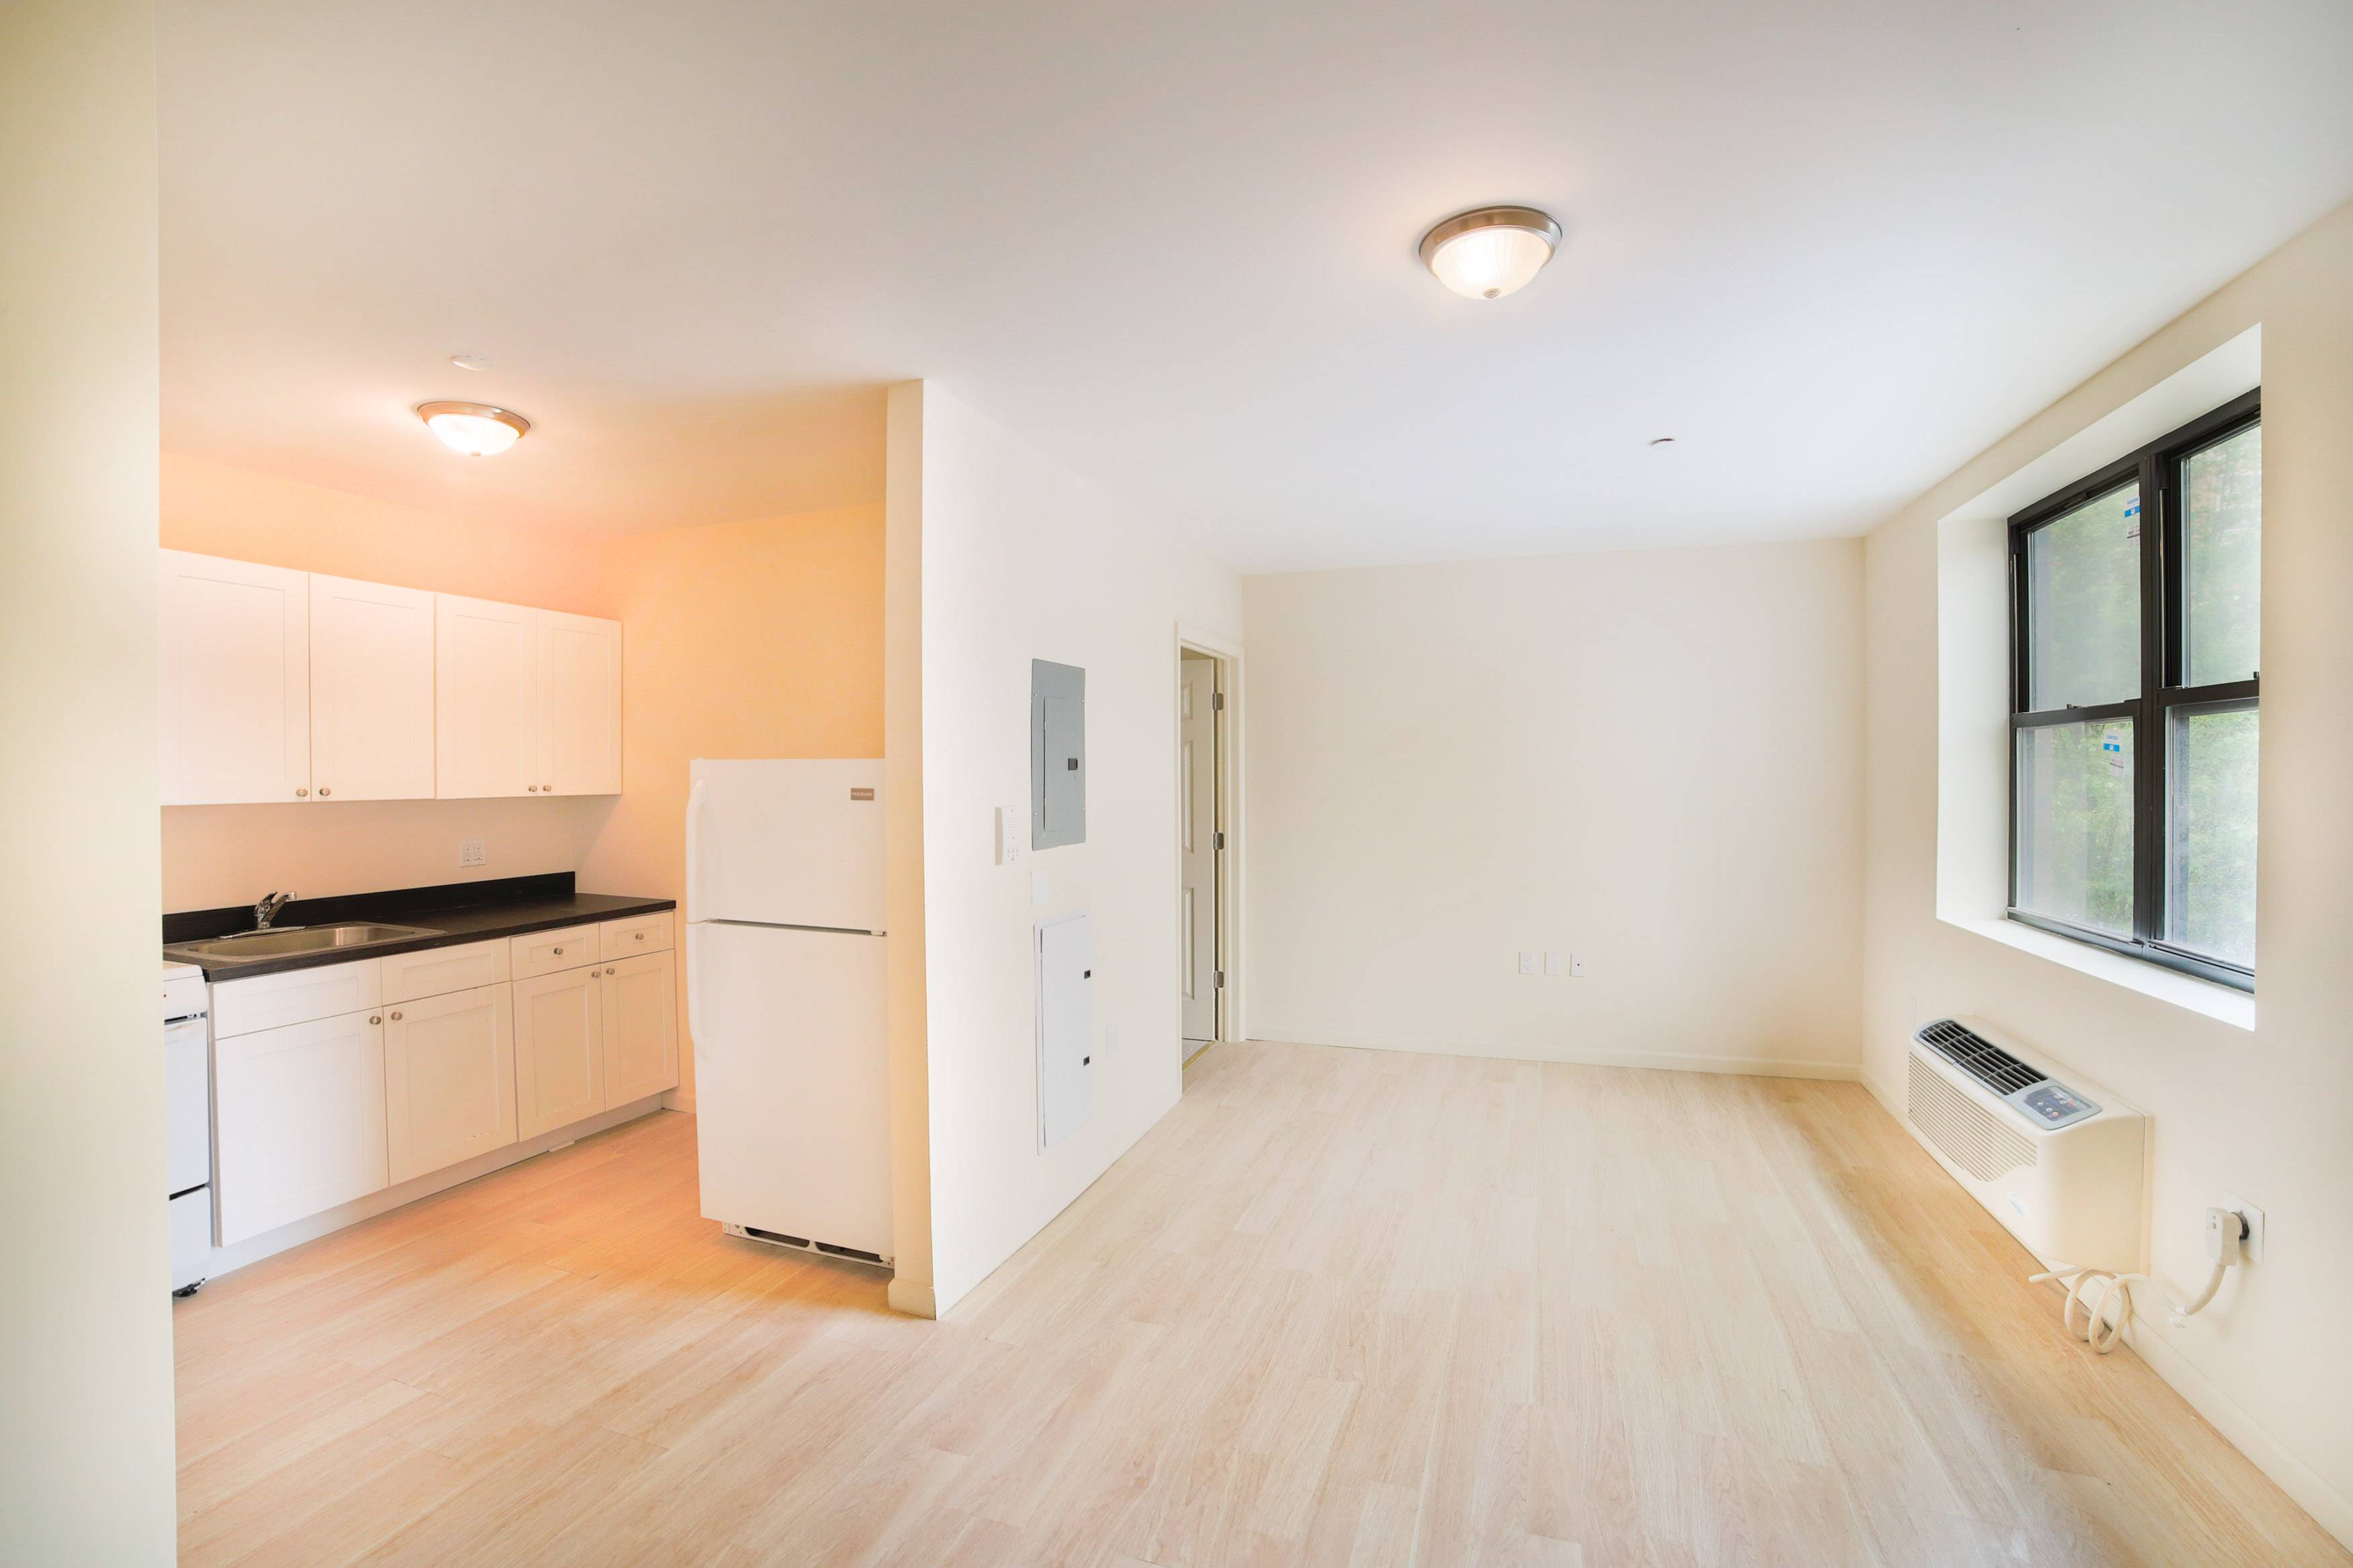 1674 Park Ave: NO FEE! New Construction 1 Bedroom Apartment For Lease in Harlem